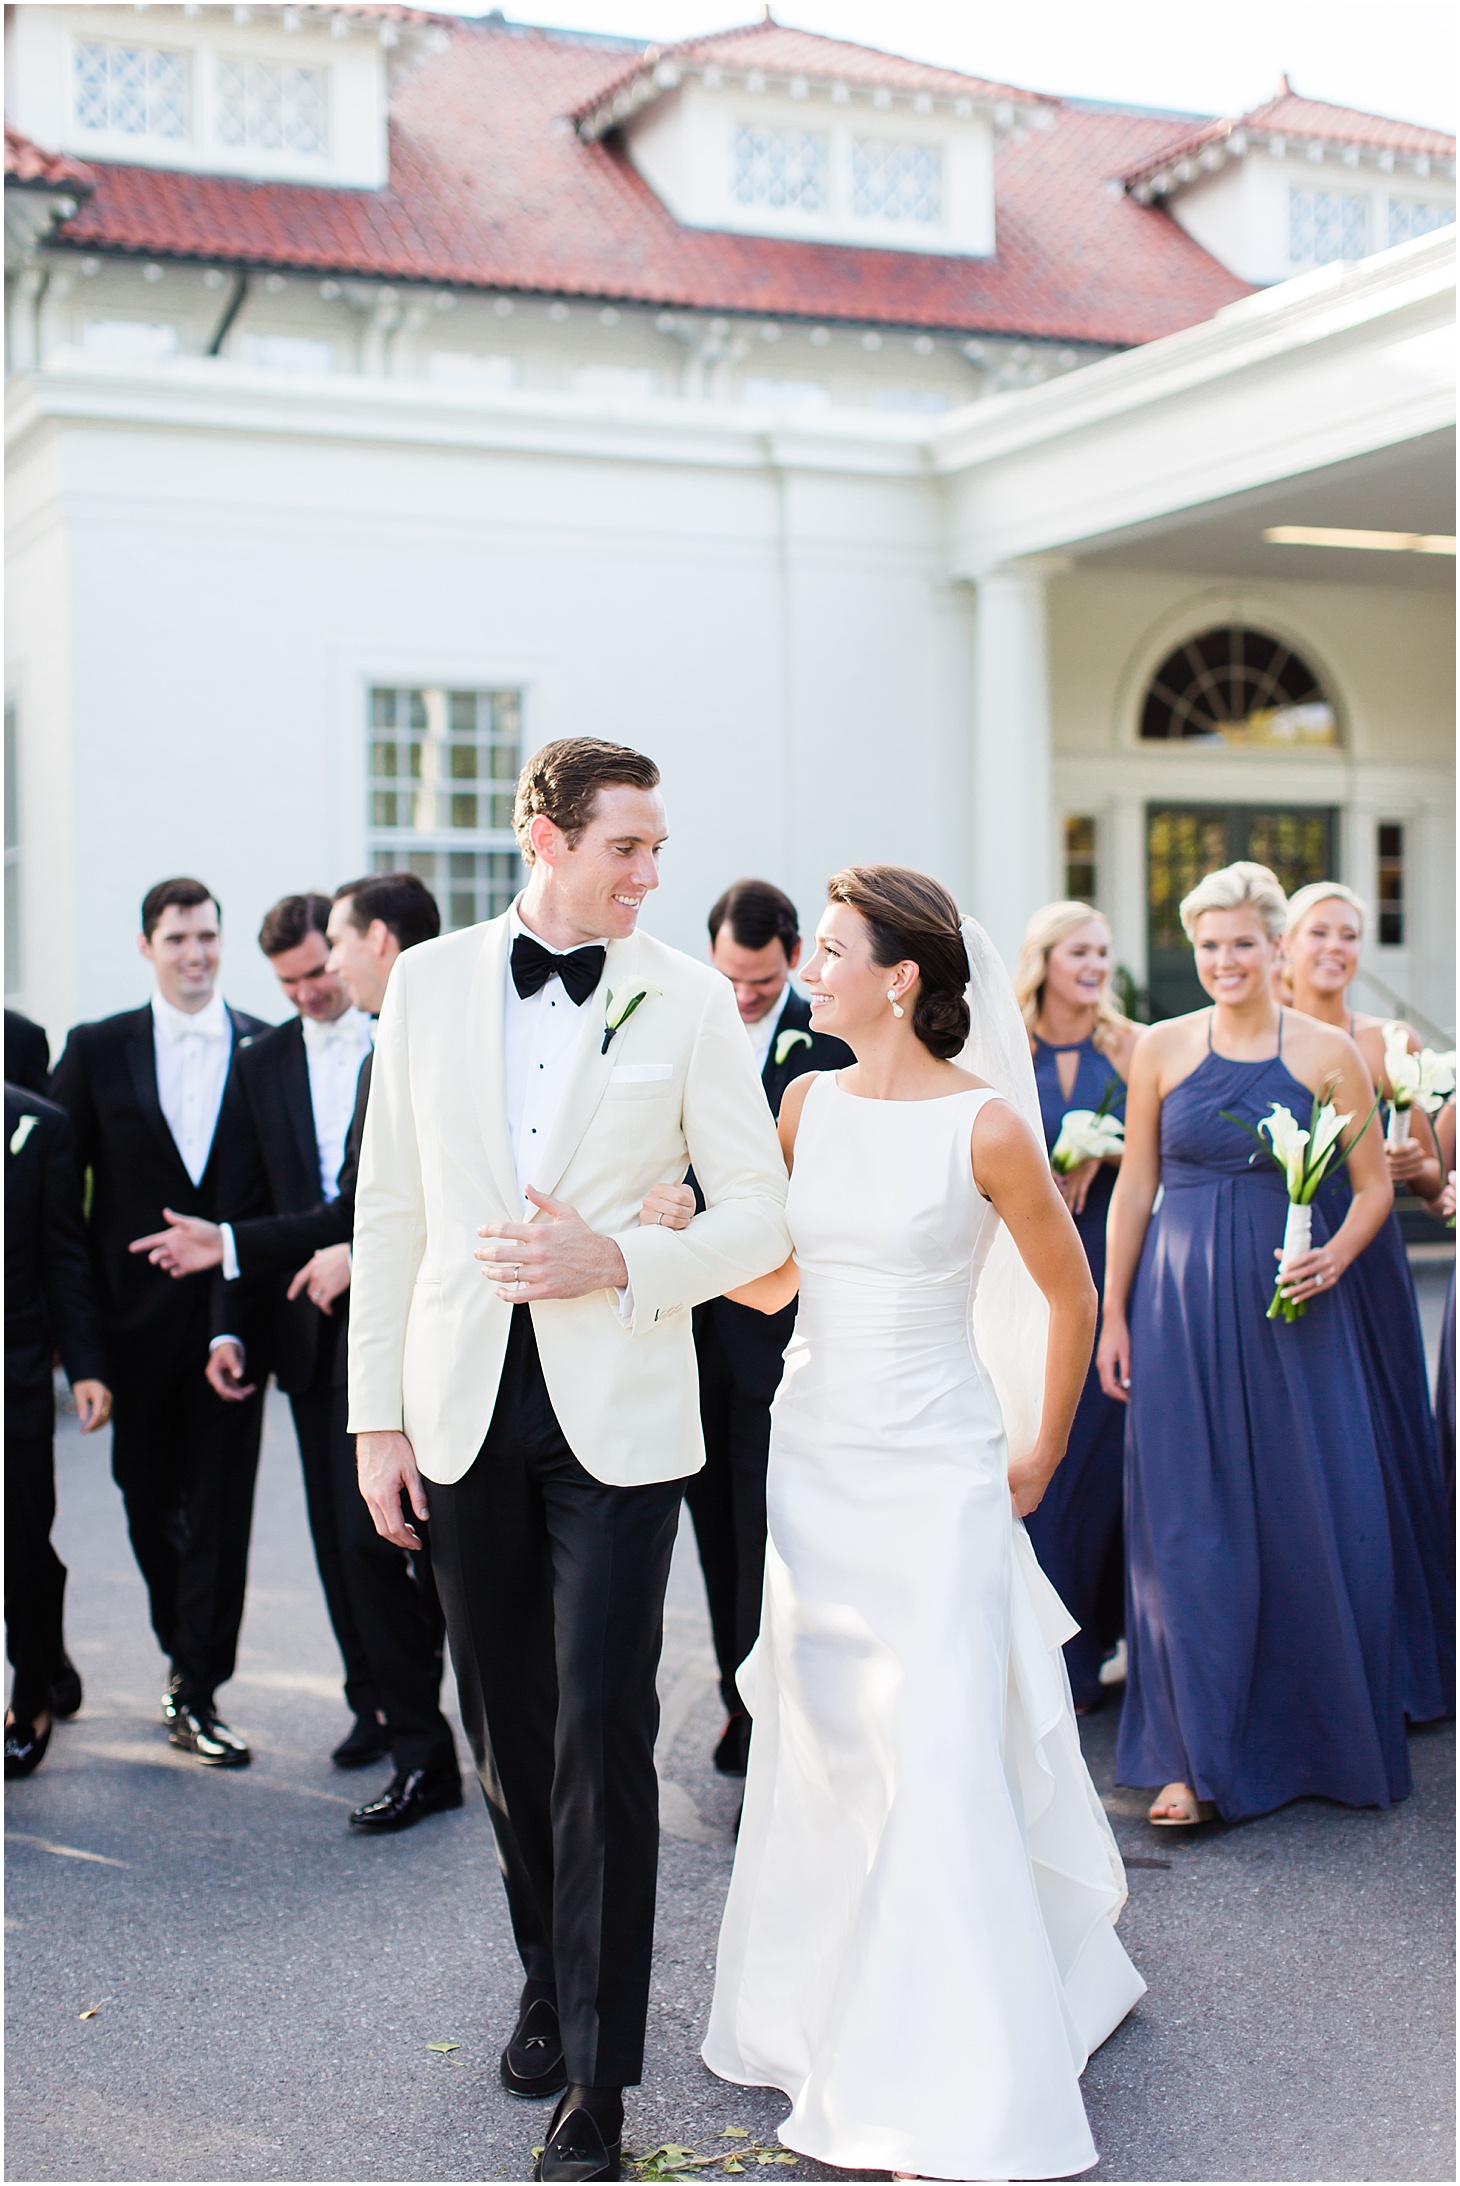 Bridal Party Portraits at Columbia Country Club | Wedding Ceremony at Cathedral of St. Matthew the Apostle | Classy October Wedding in Washington, D.C. | Sarah Bradshaw Photography